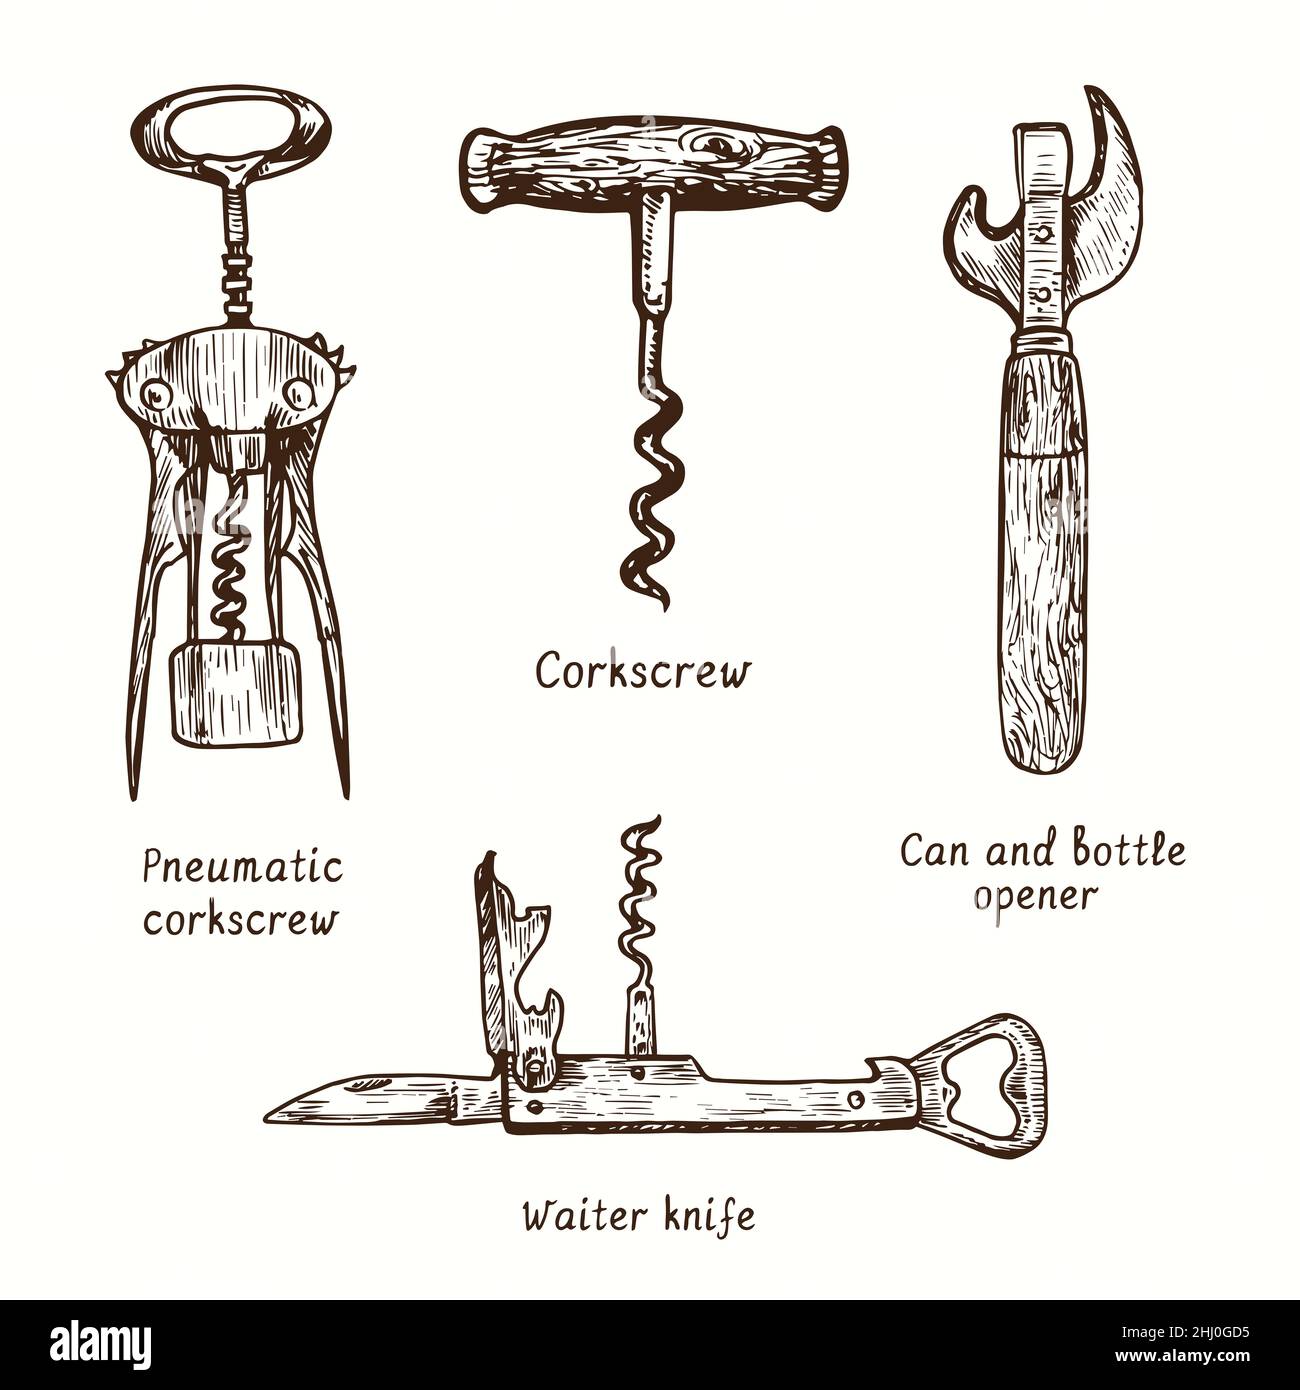 Pneumatic corkscrew, corkscrew, can and bottle opener and waiter knife. Ink black and white doodle drawing in woodcut style. Stock Photo